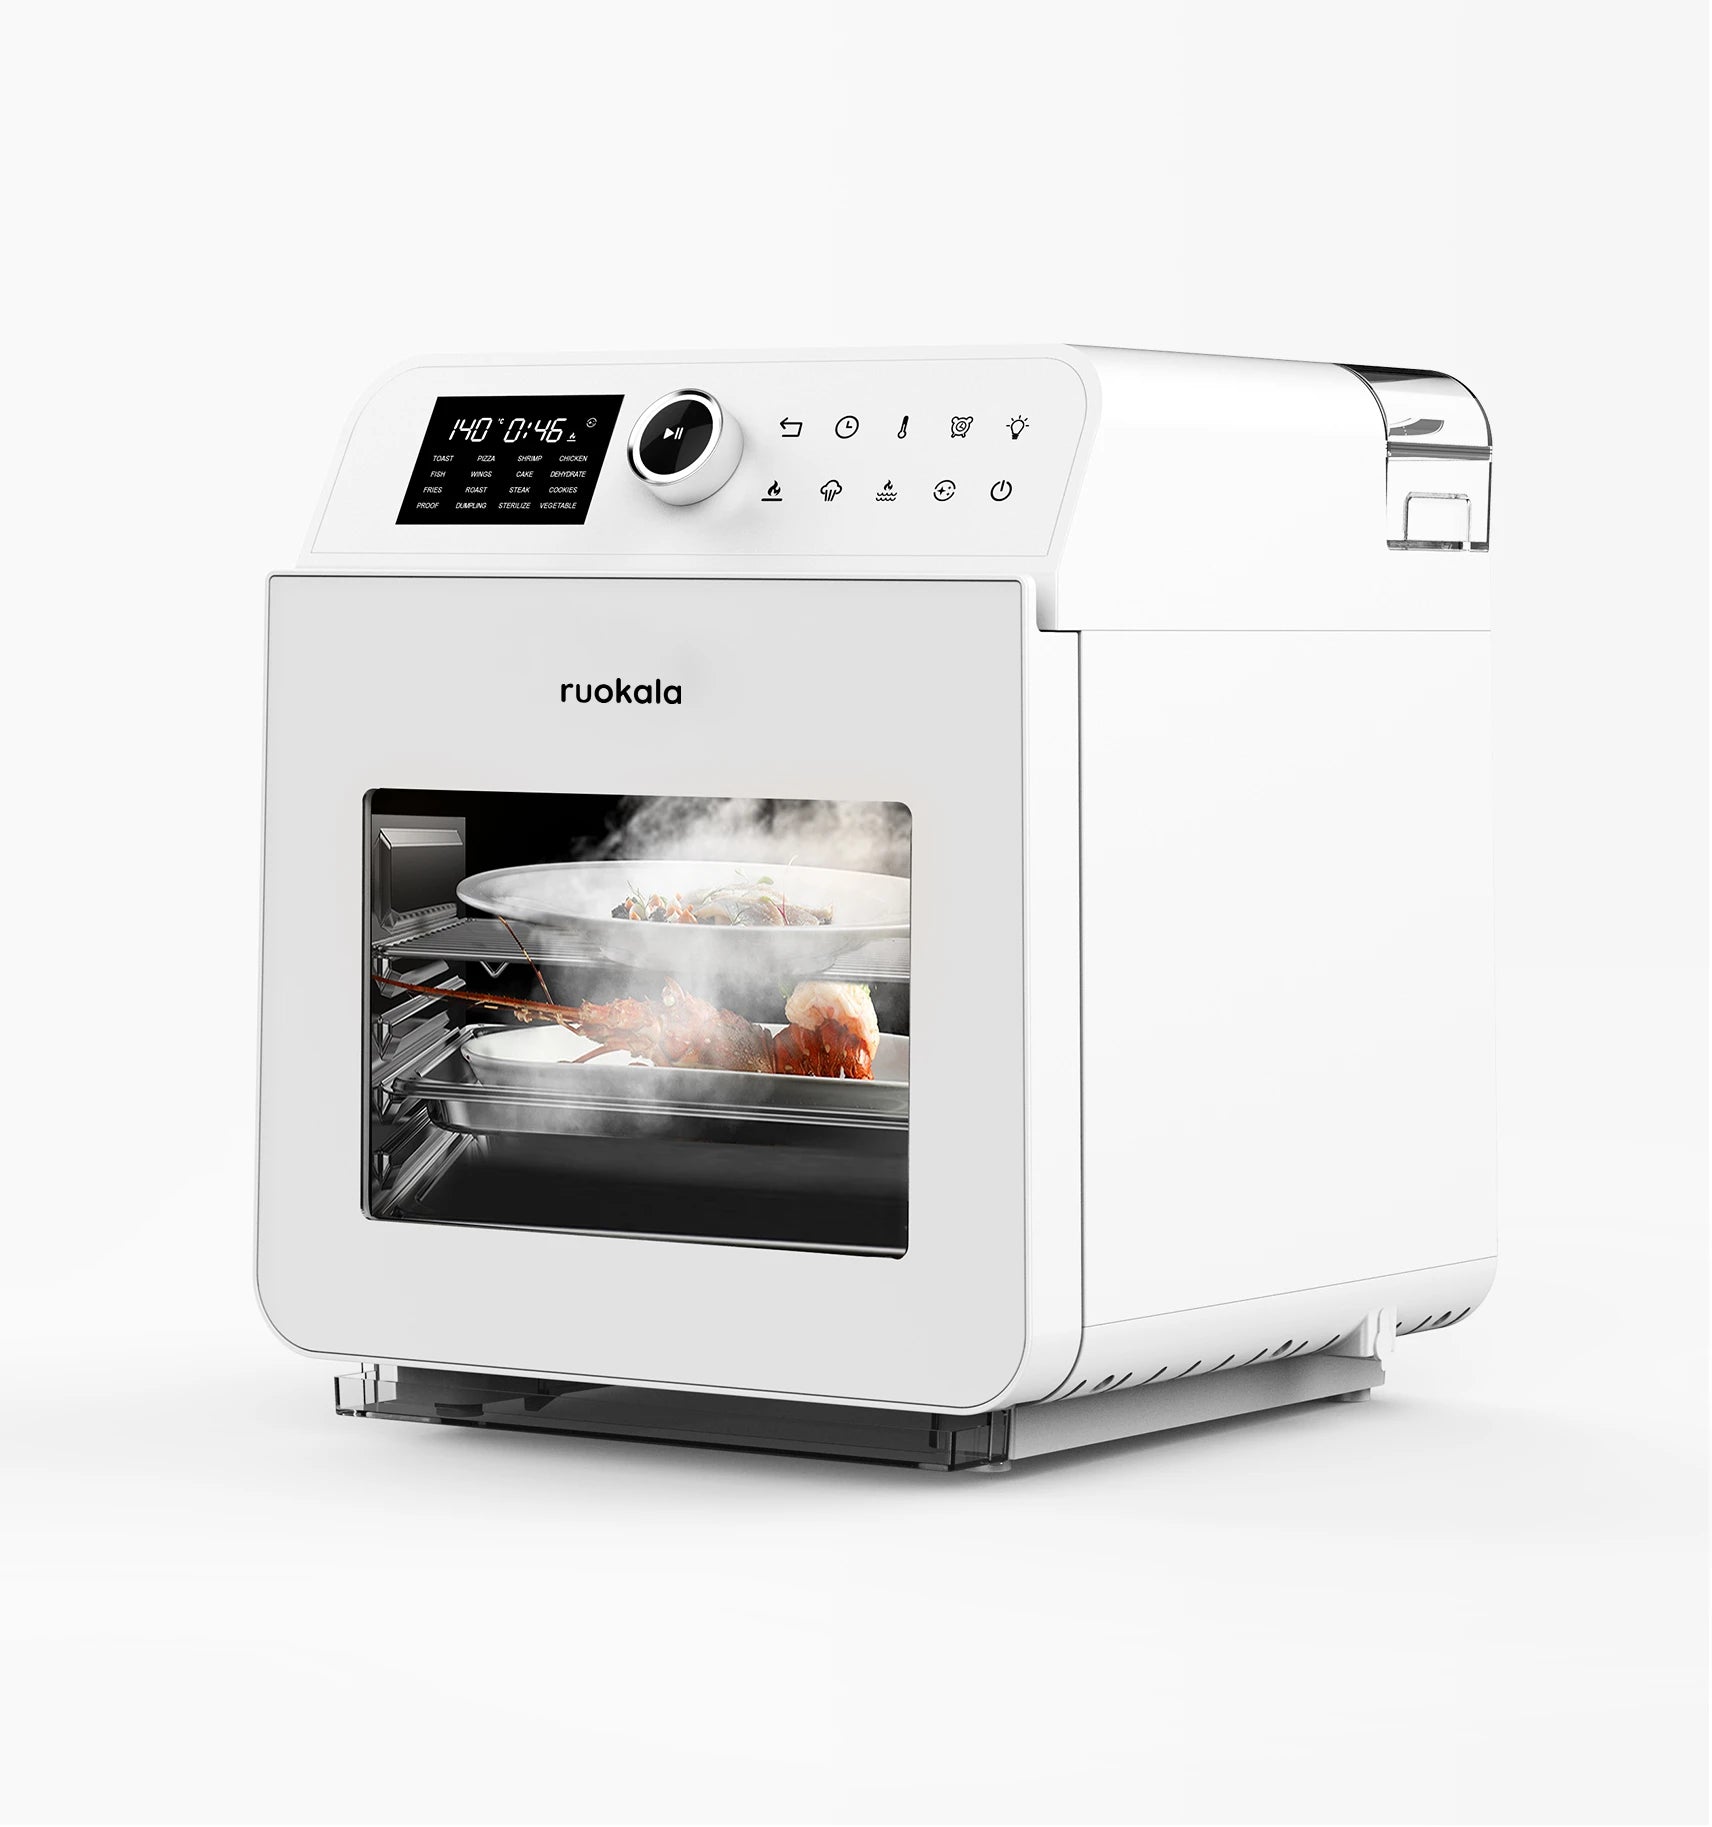 Premium Ruokala air fryer in operation, steaming fresh seafood, highlighting the appliance's efficient cooking and sleek design.